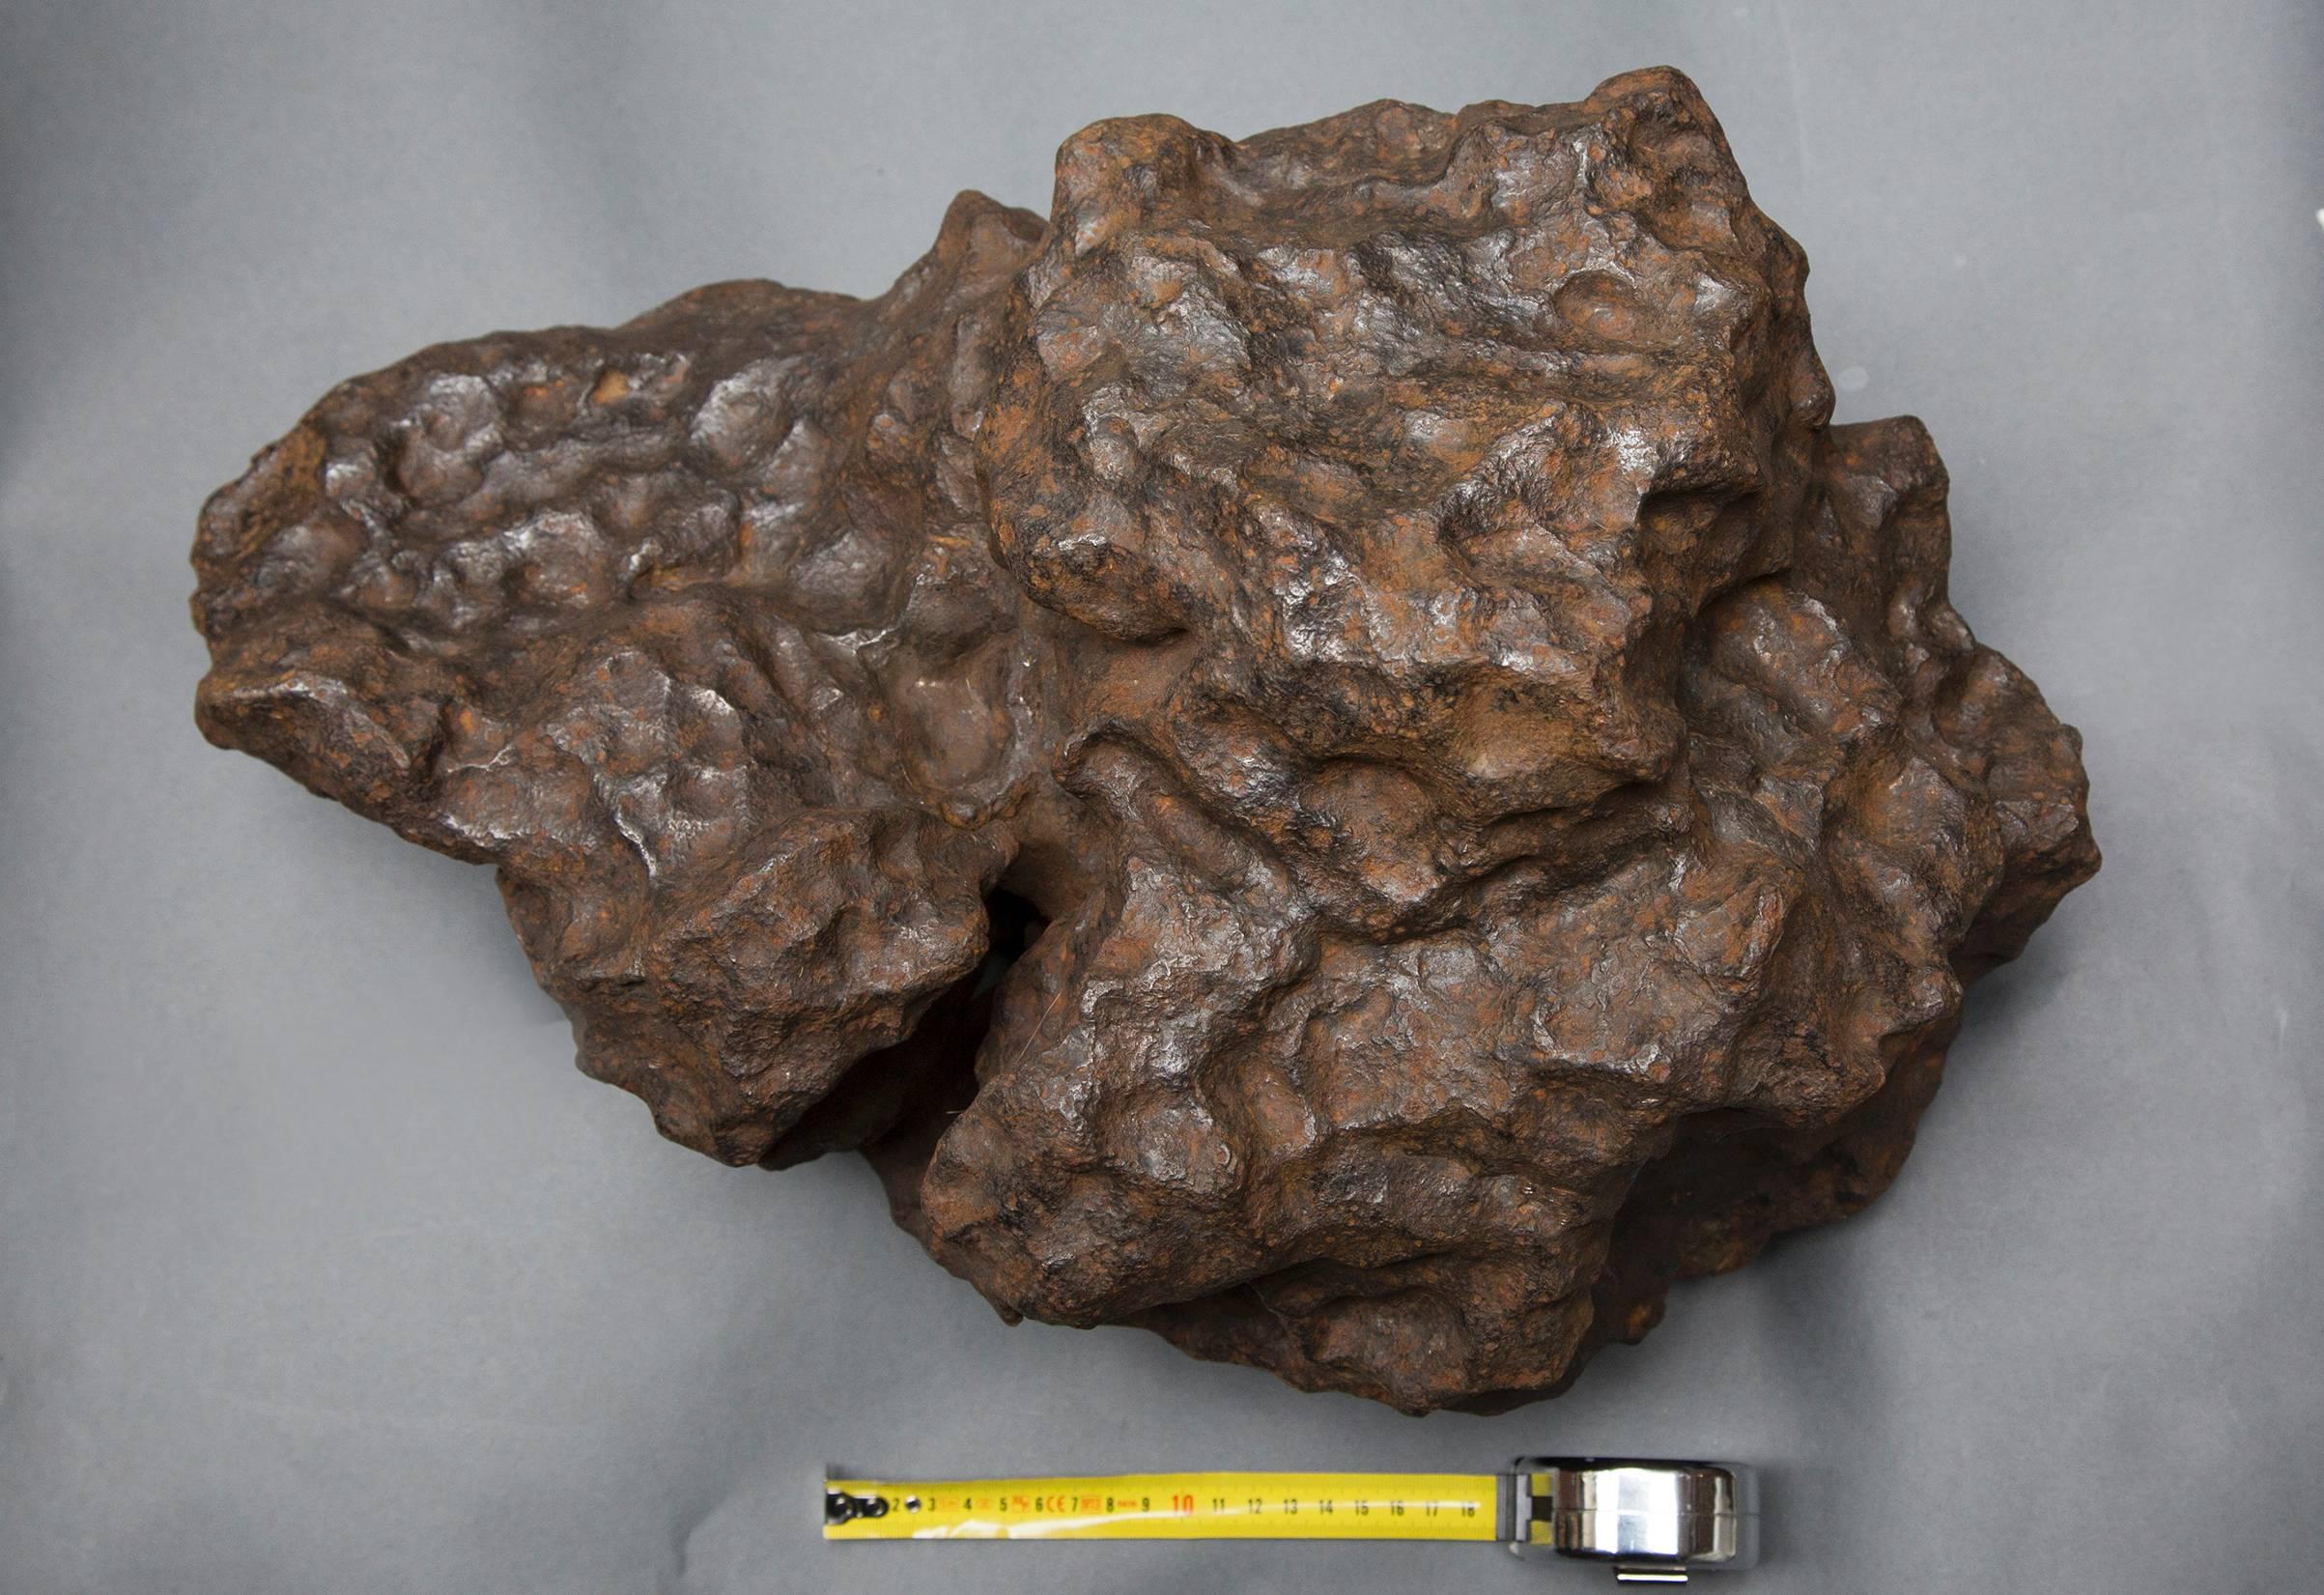 Gigantic 176 kilos siderite meteorite, octahedrite classified IAB.
Meteorites known as Campo del Cielo are composed almost exclusively of iron and nickel.
Campo del Cielo is a group of meteorites found in Argentina. Covering an area of tens of